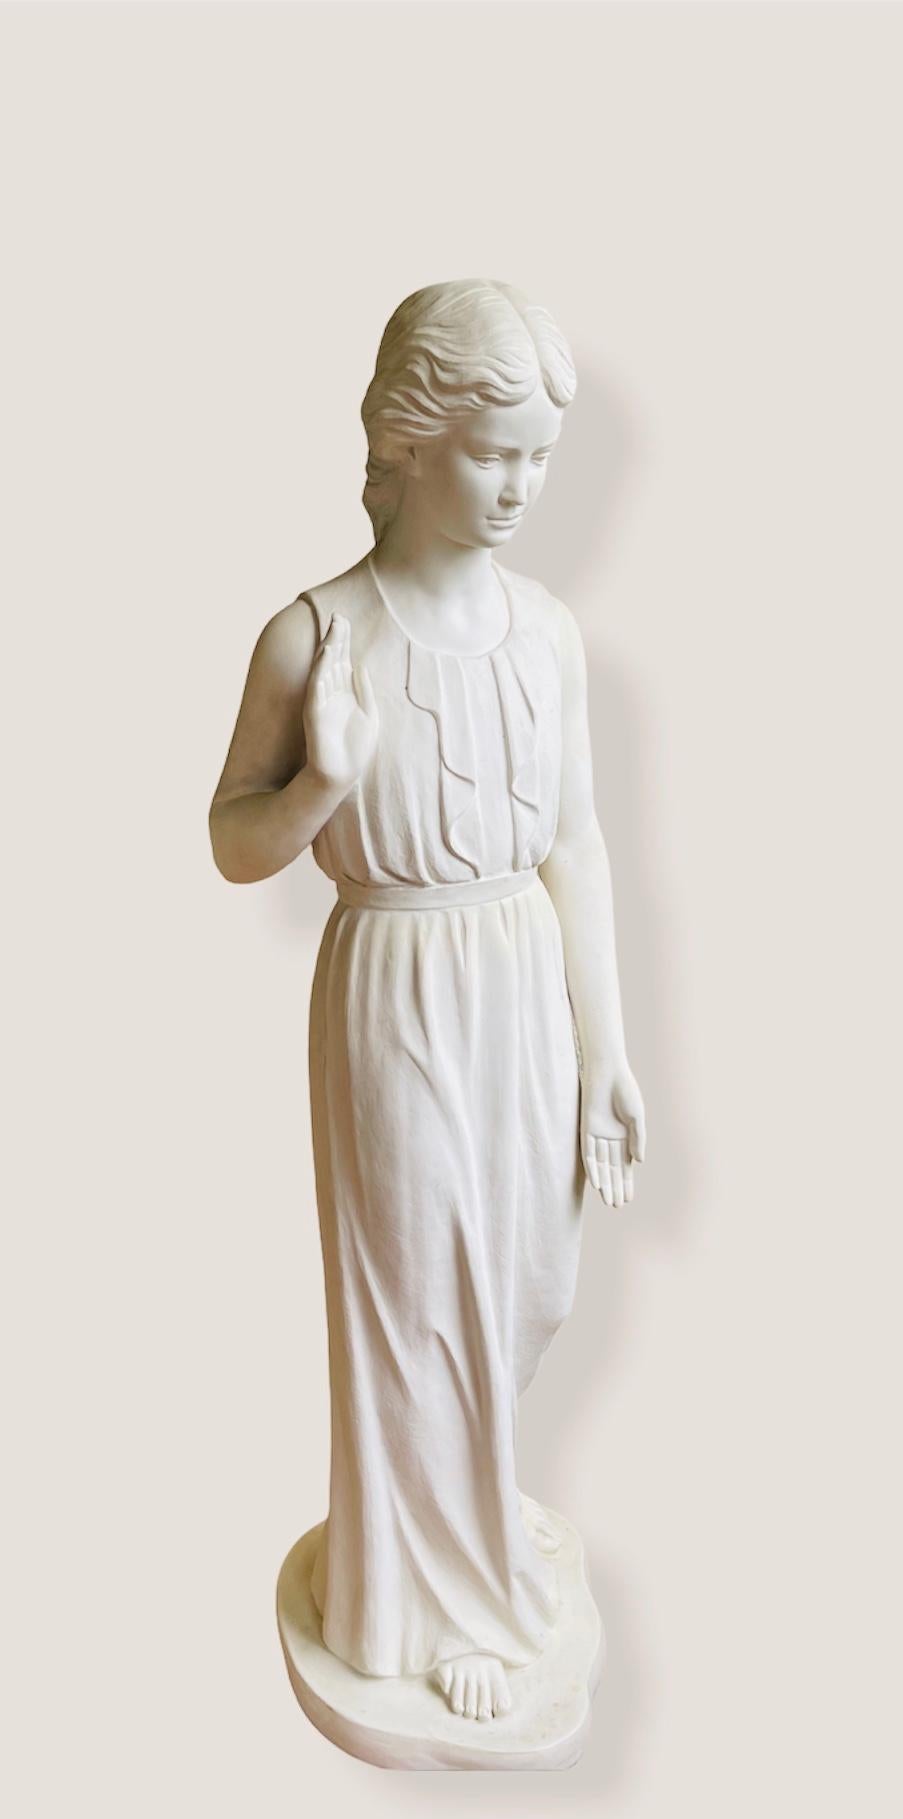 Life Size Bonded or Cold Cast Marble Garden Sculpture of a Young Girl For Sale 4